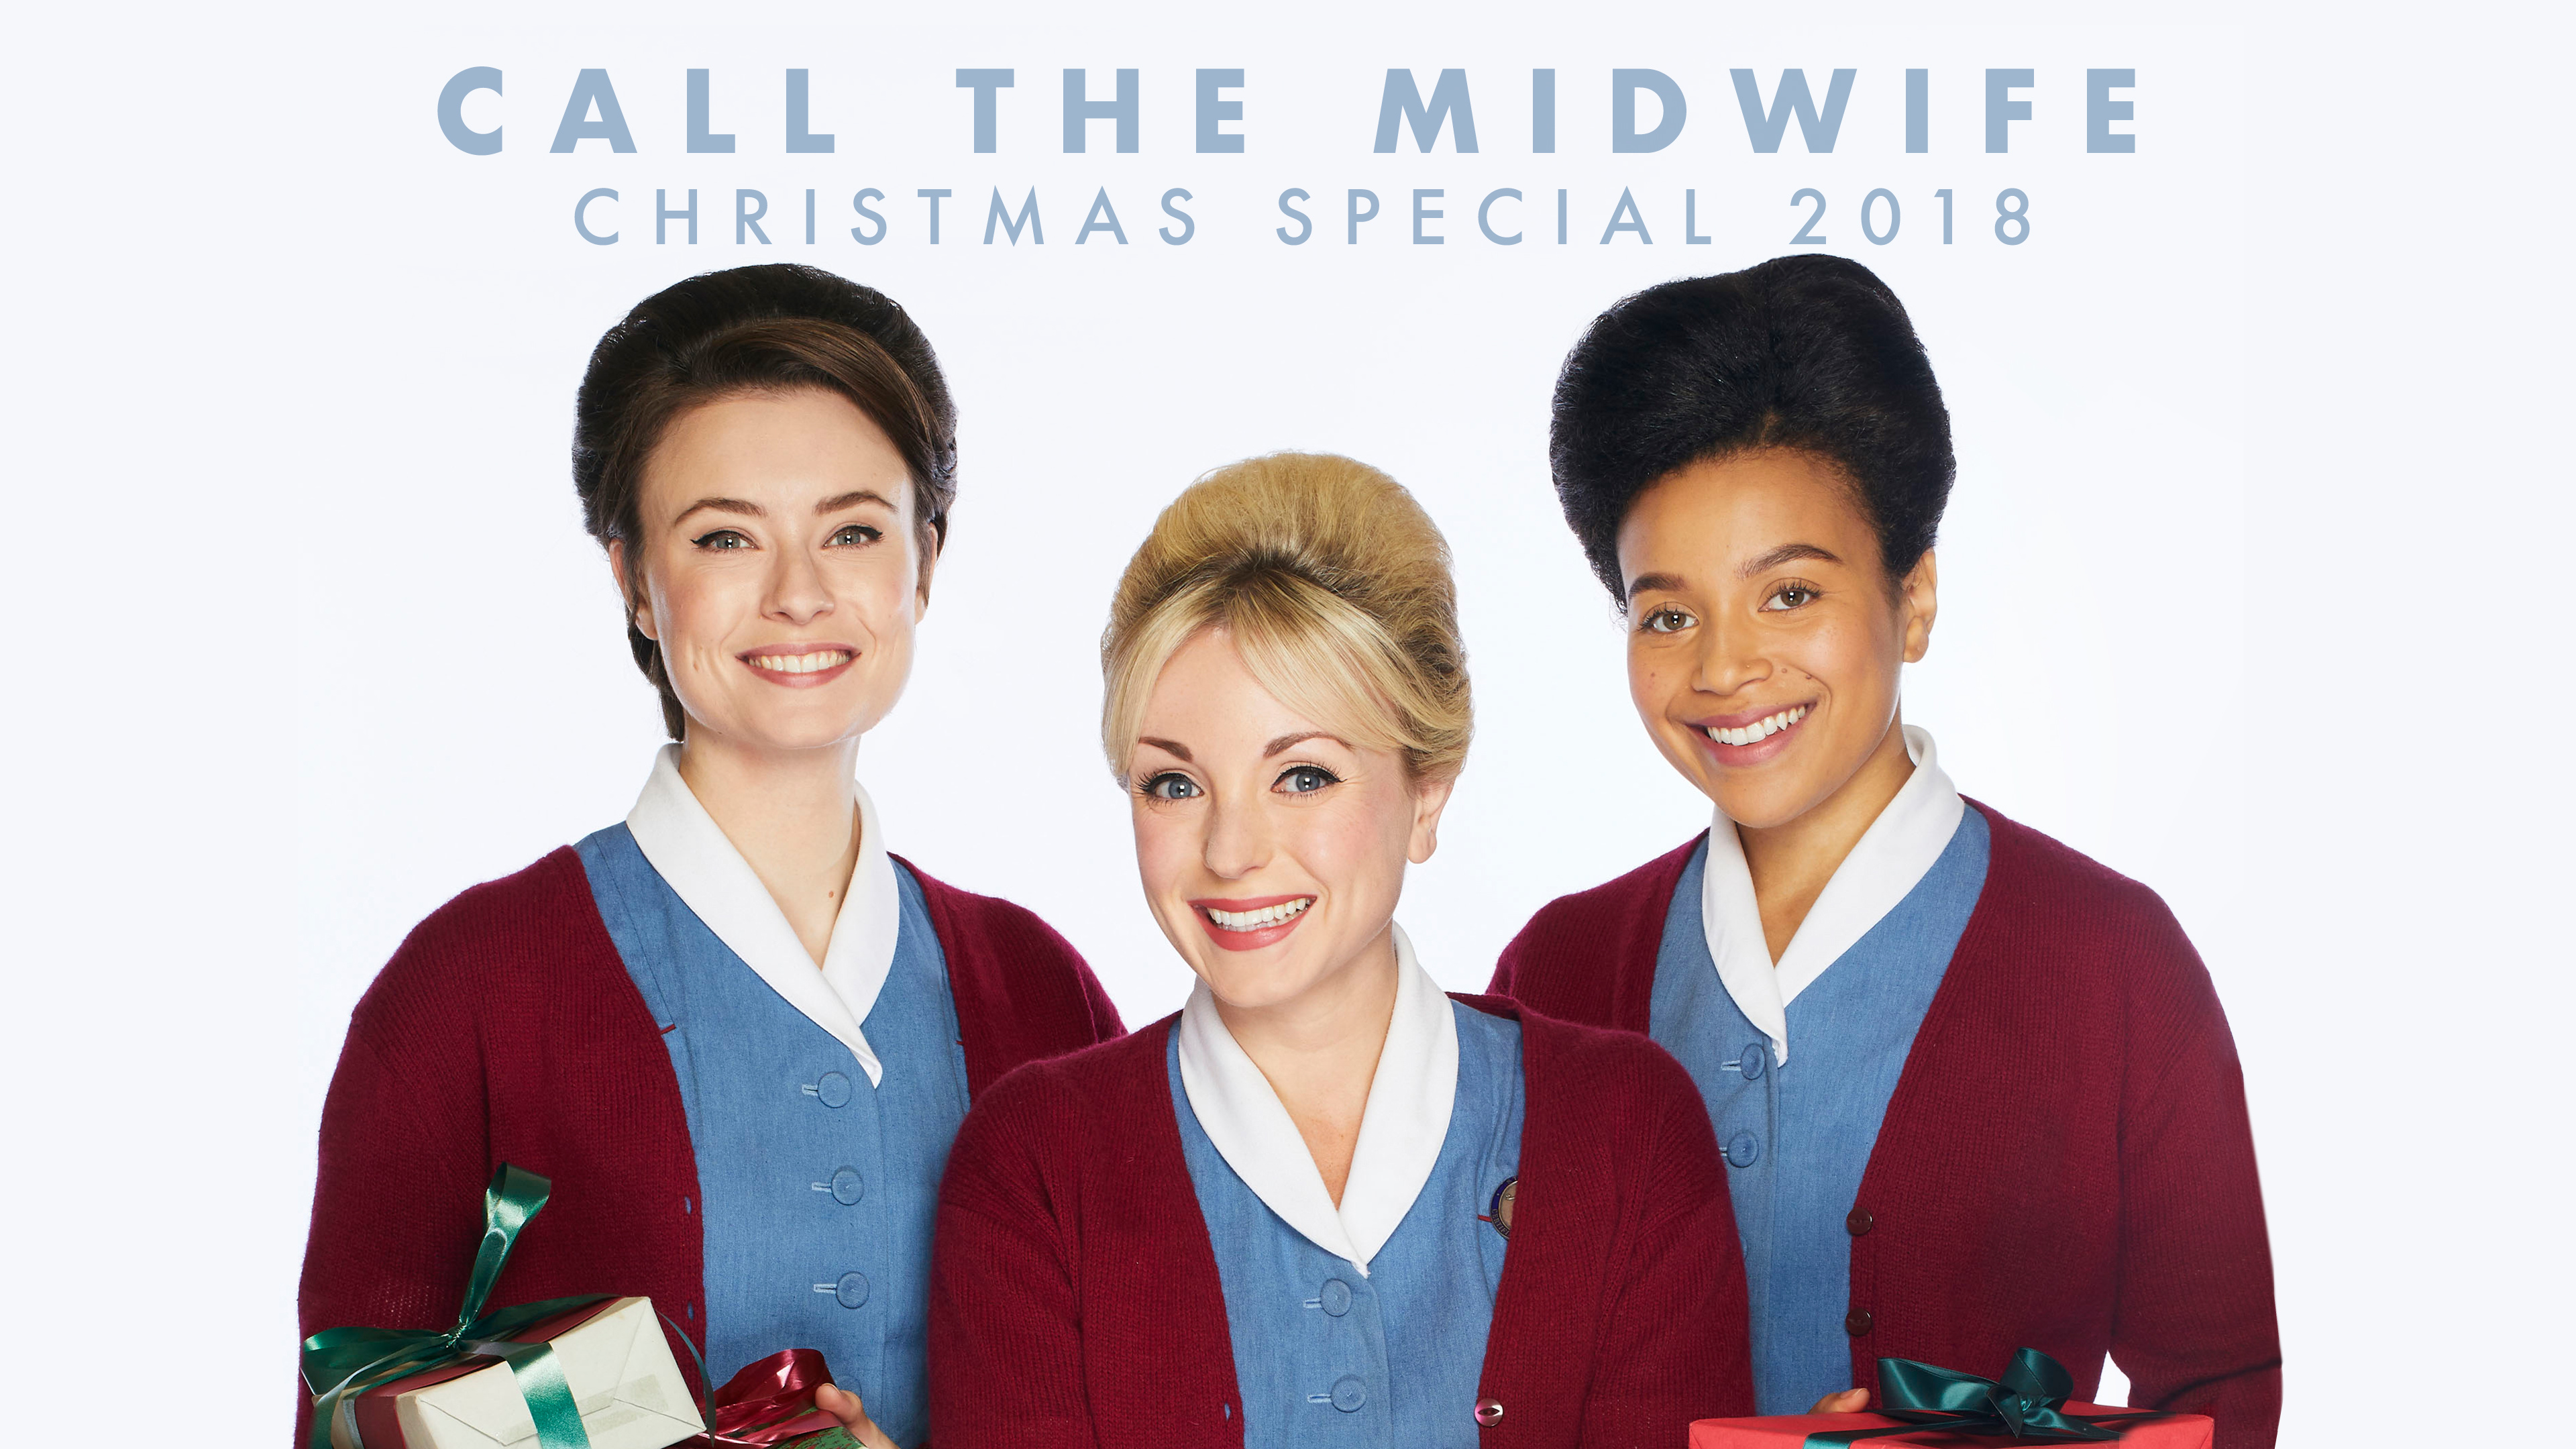 How to watch Call the Midwife Christmas Special 2018 UKTV Play